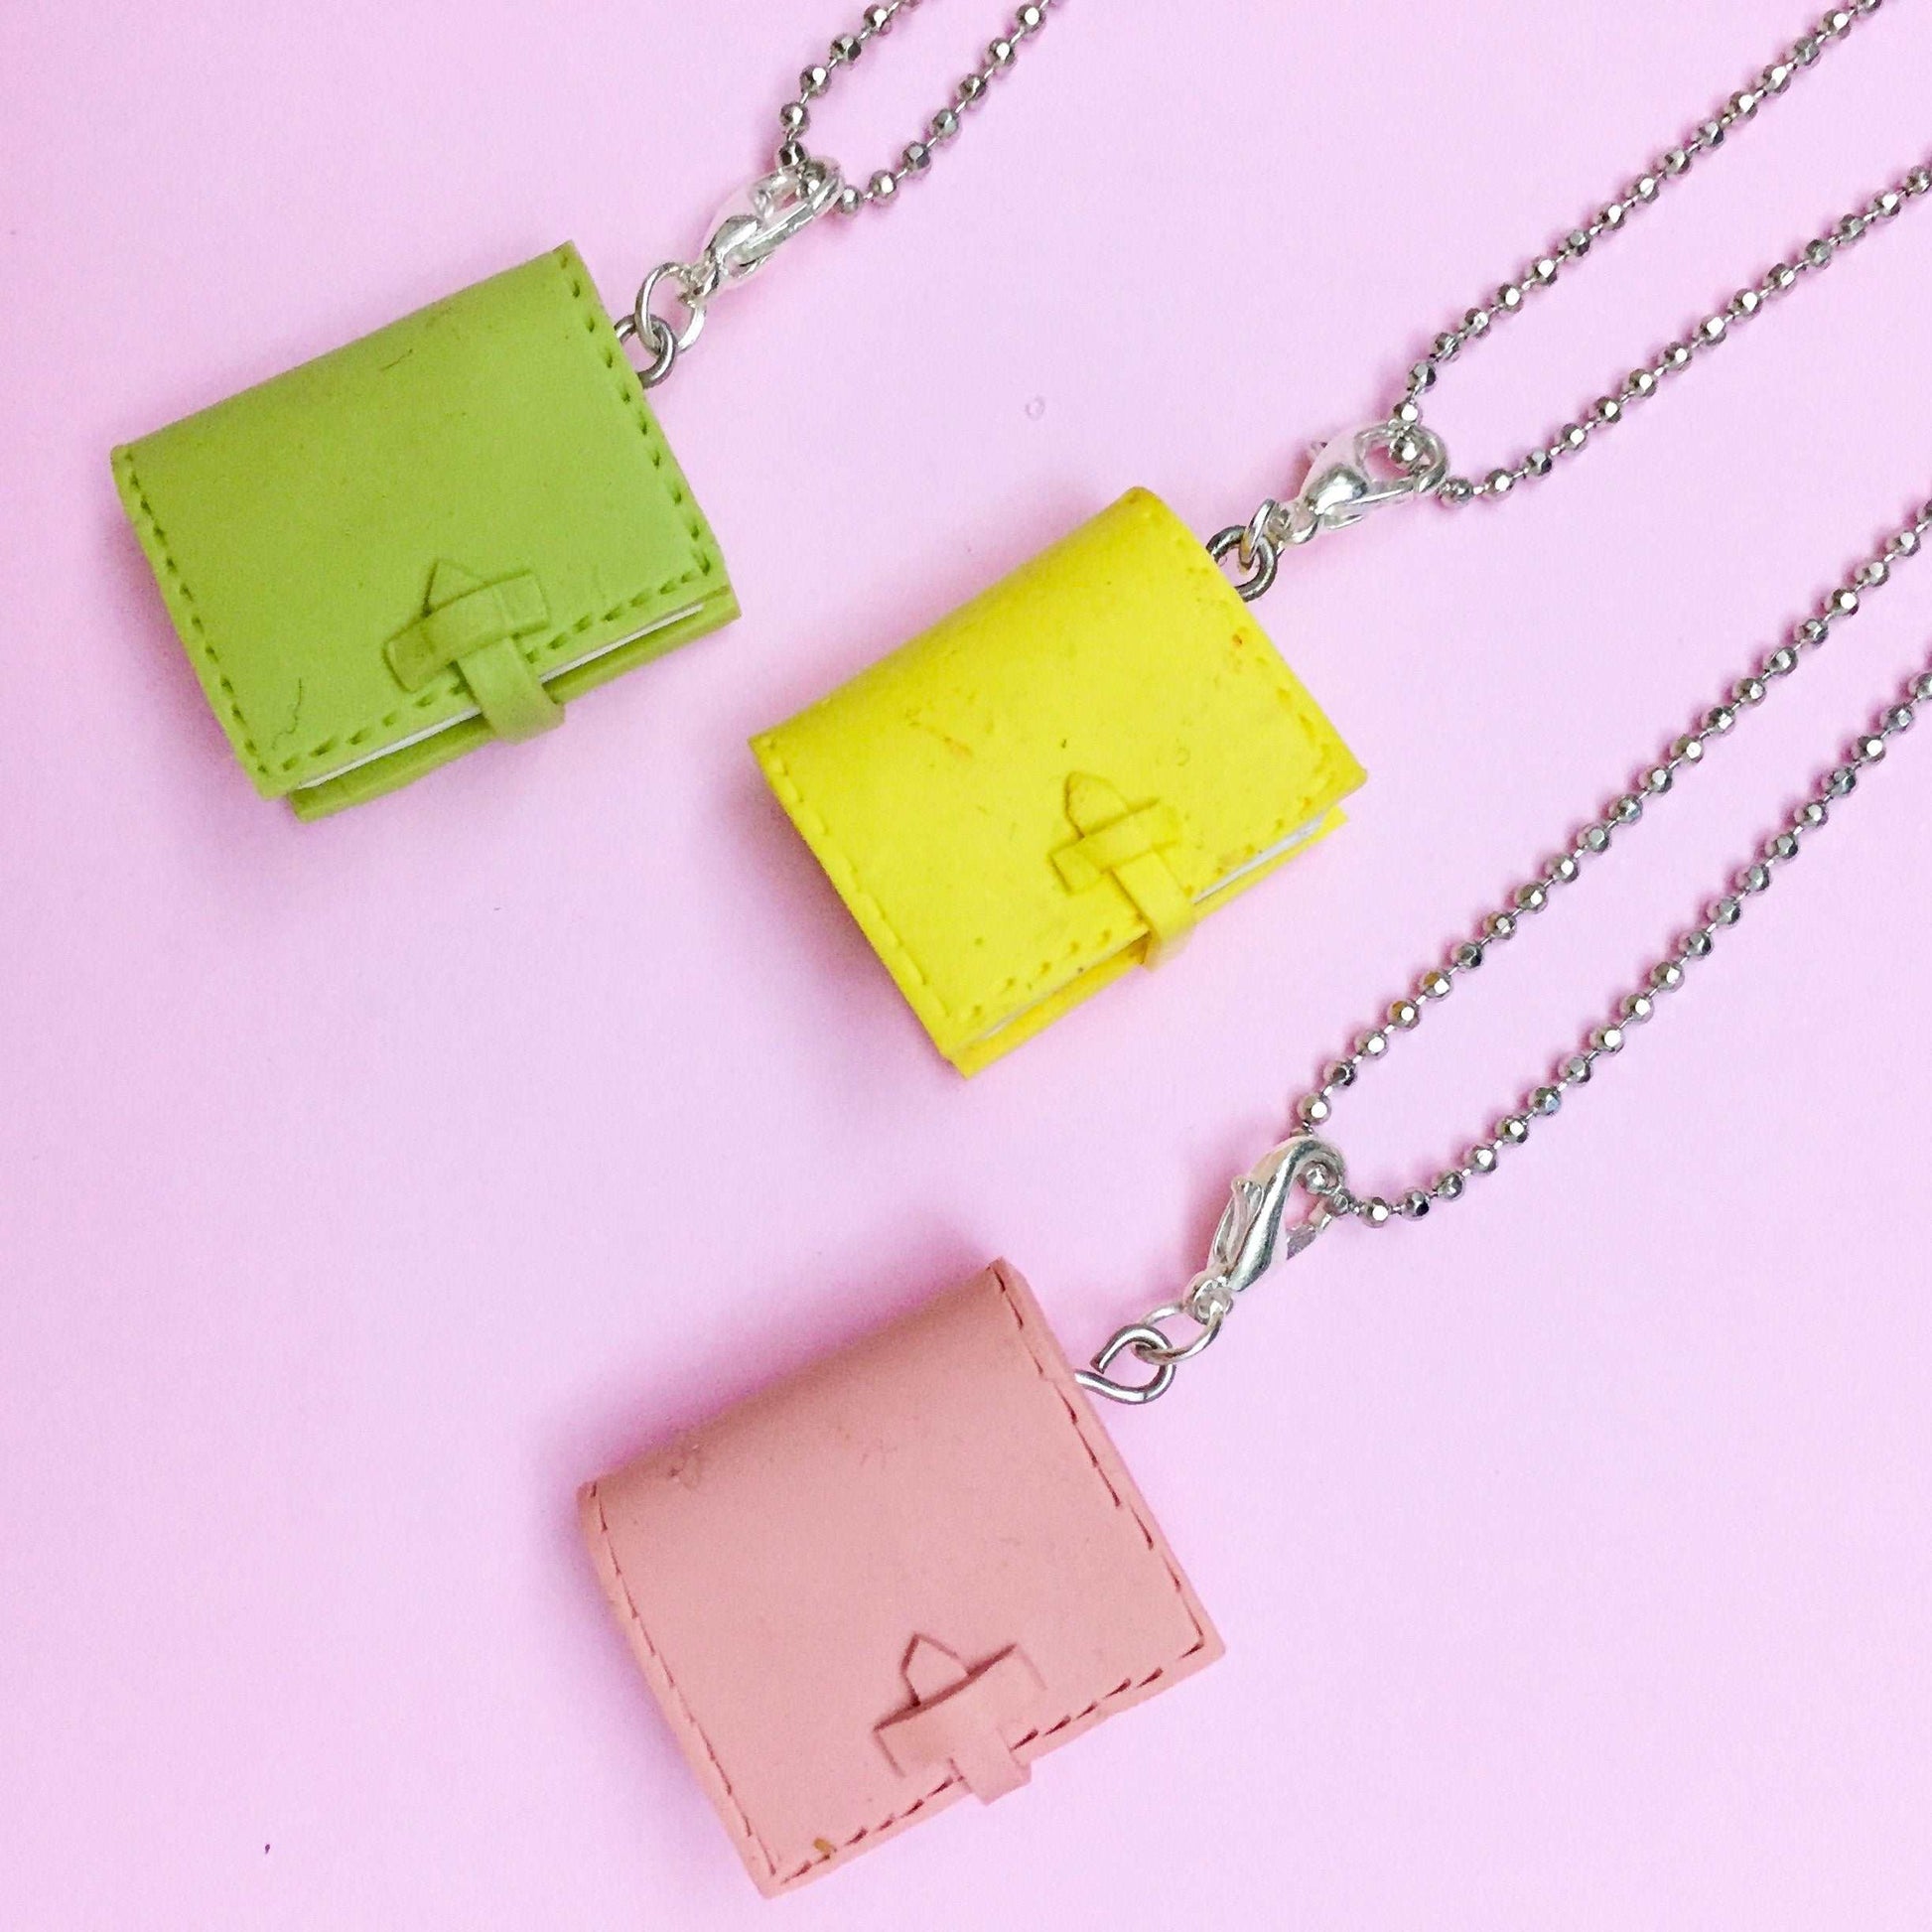 Green Planner Mini Diary Charm Pendant Necklace